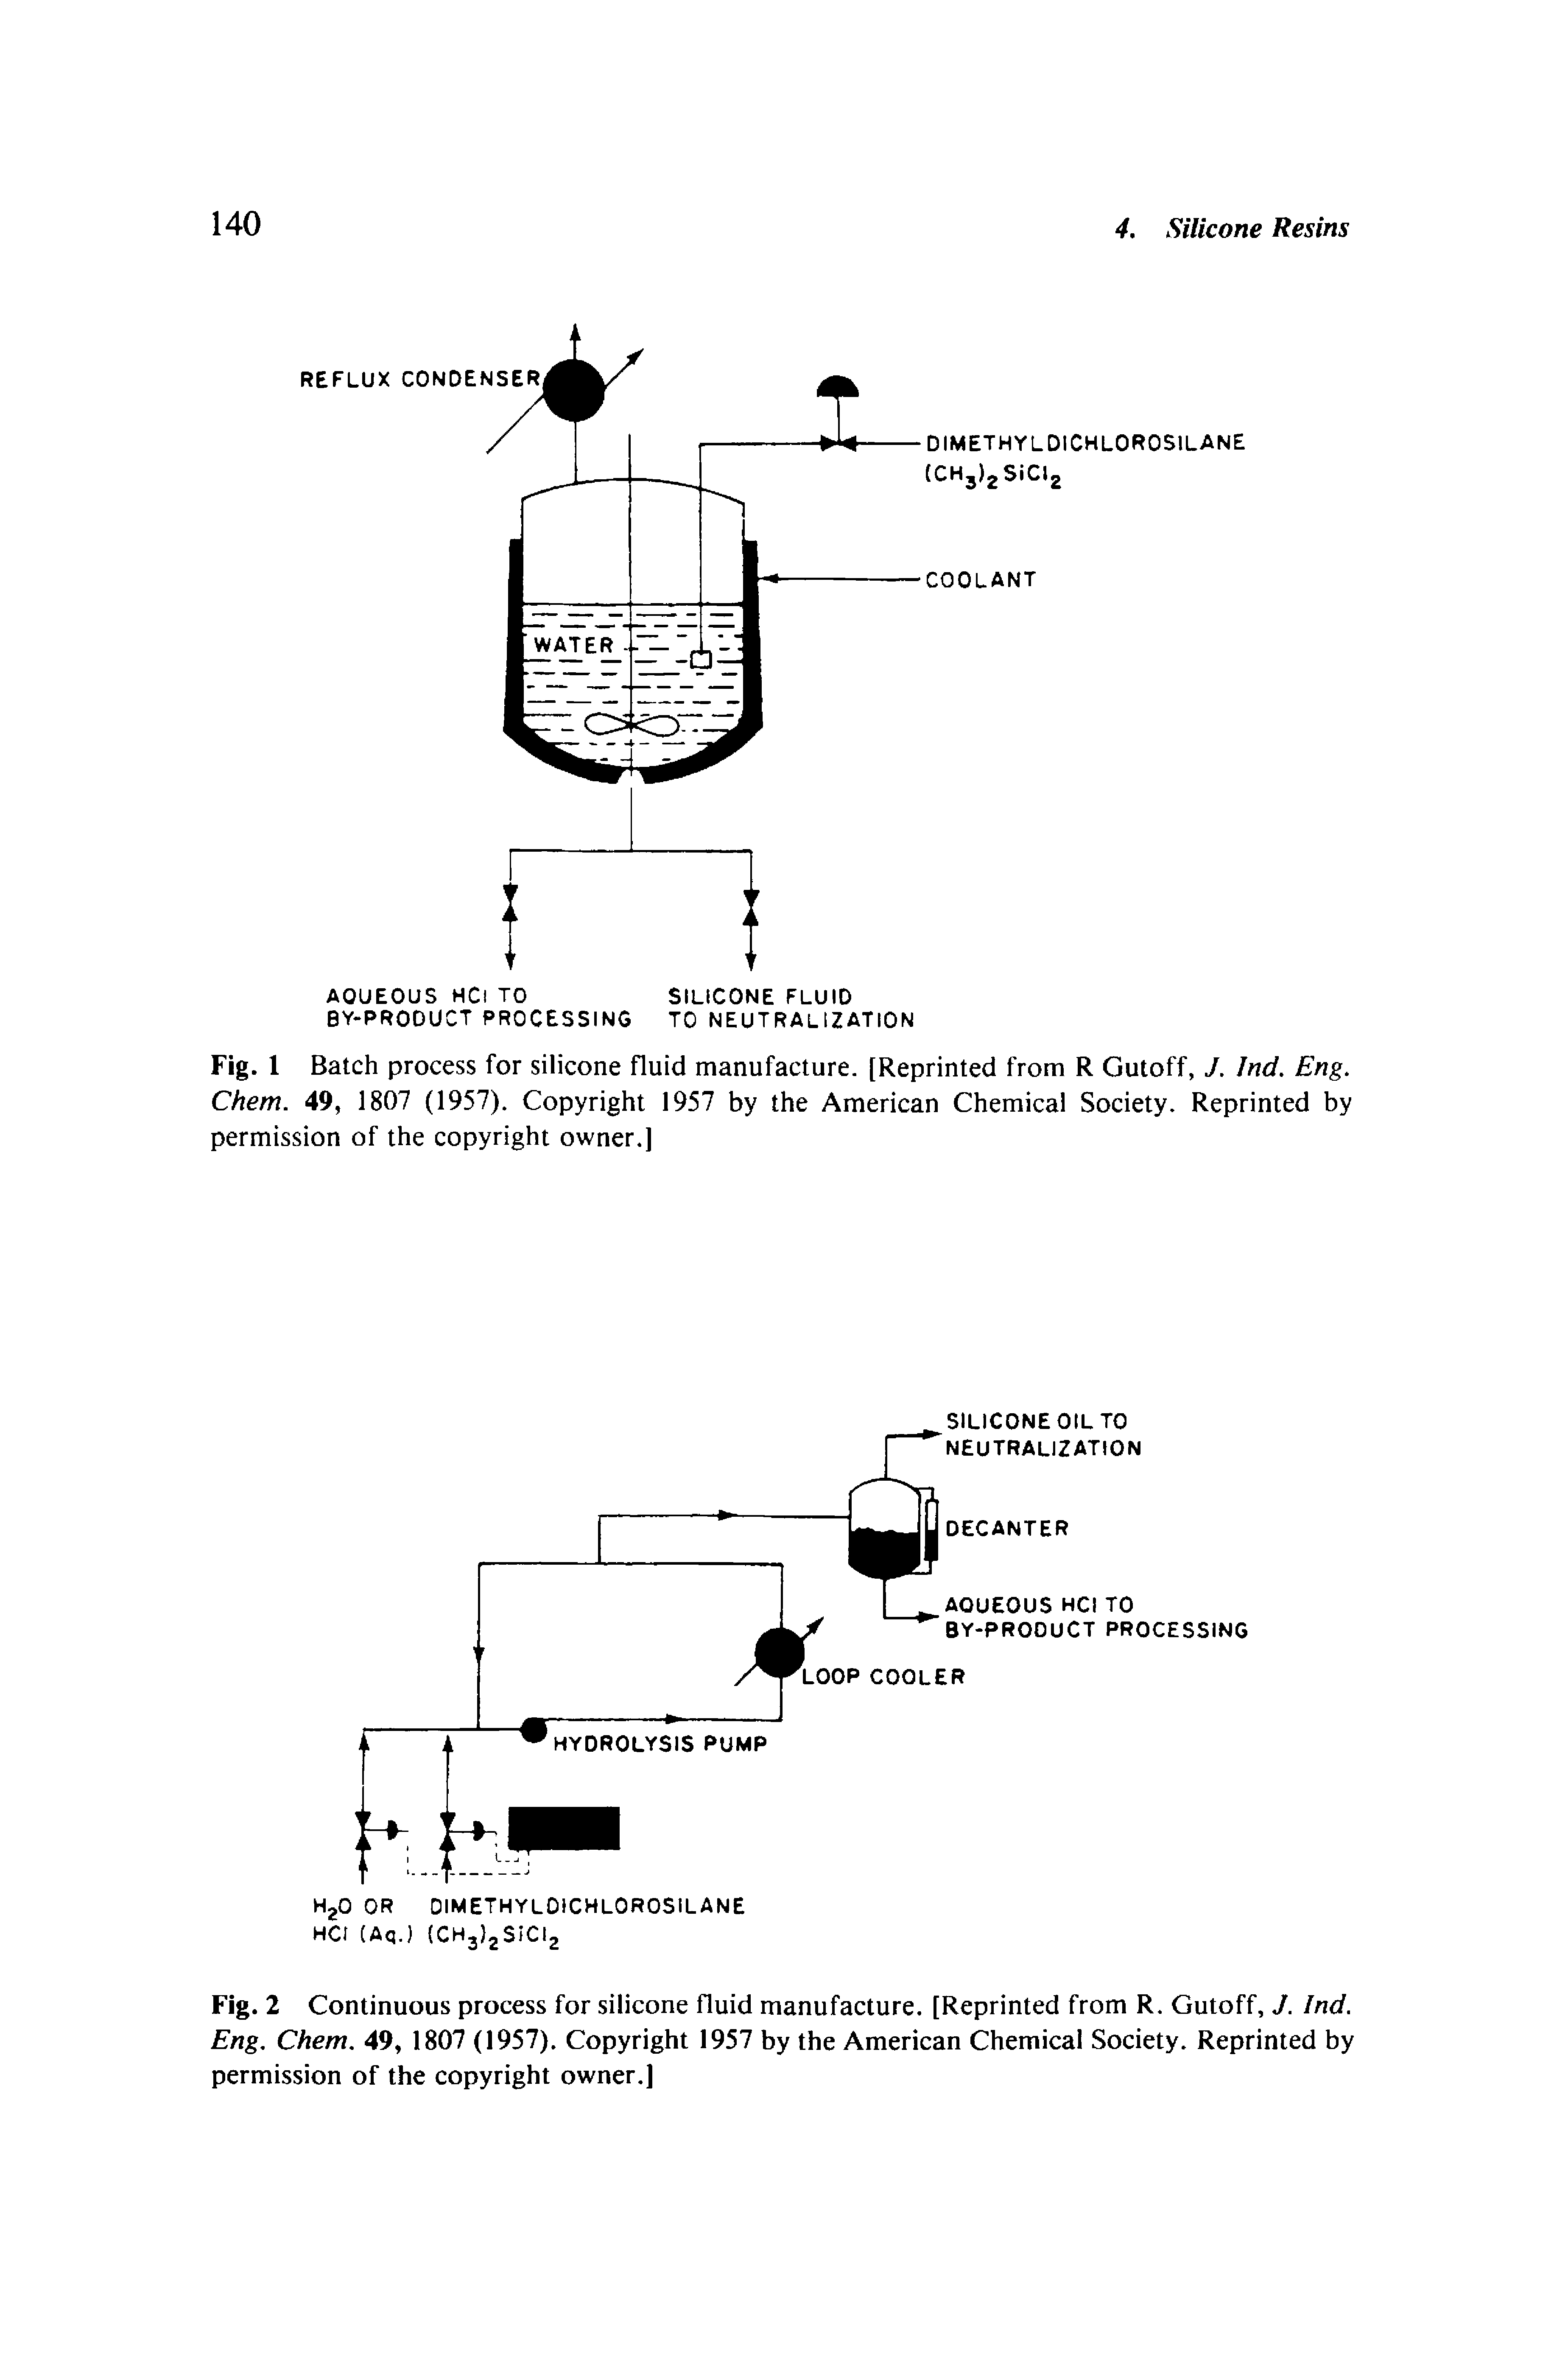 Fig. 1 Batch process for silicone fluid manufacture. [Reprinted from R Cutoff, J. Ind. Eng. Chem. 49, 1807 (1957). Copyright 1957 by the American Chemical Society. Reprinted by permission of the copyright owner.]...